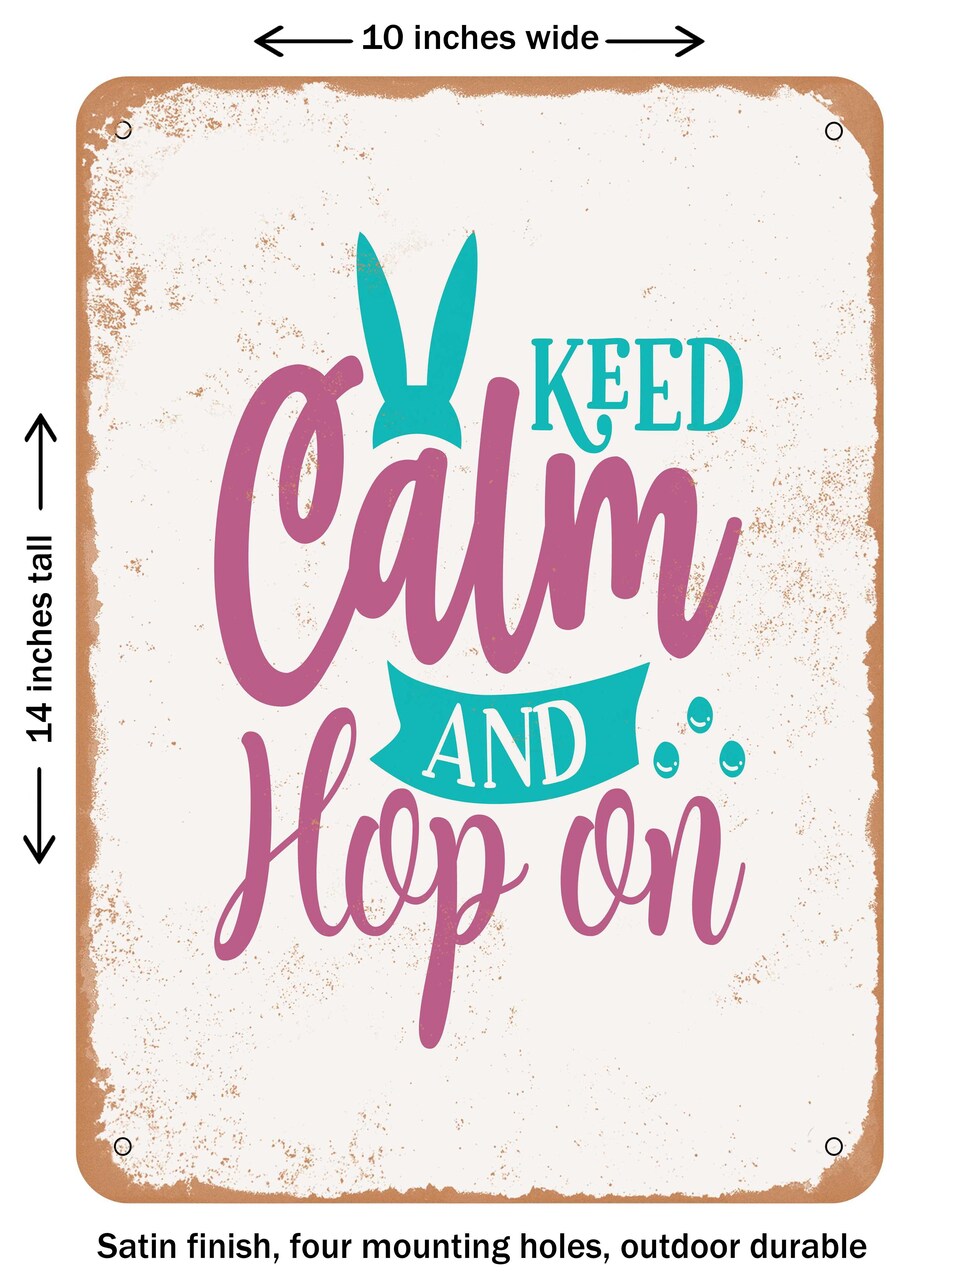 DECORATIVE METAL SIGN - Keed Calm and Hop On  - Vintage Rusty Look